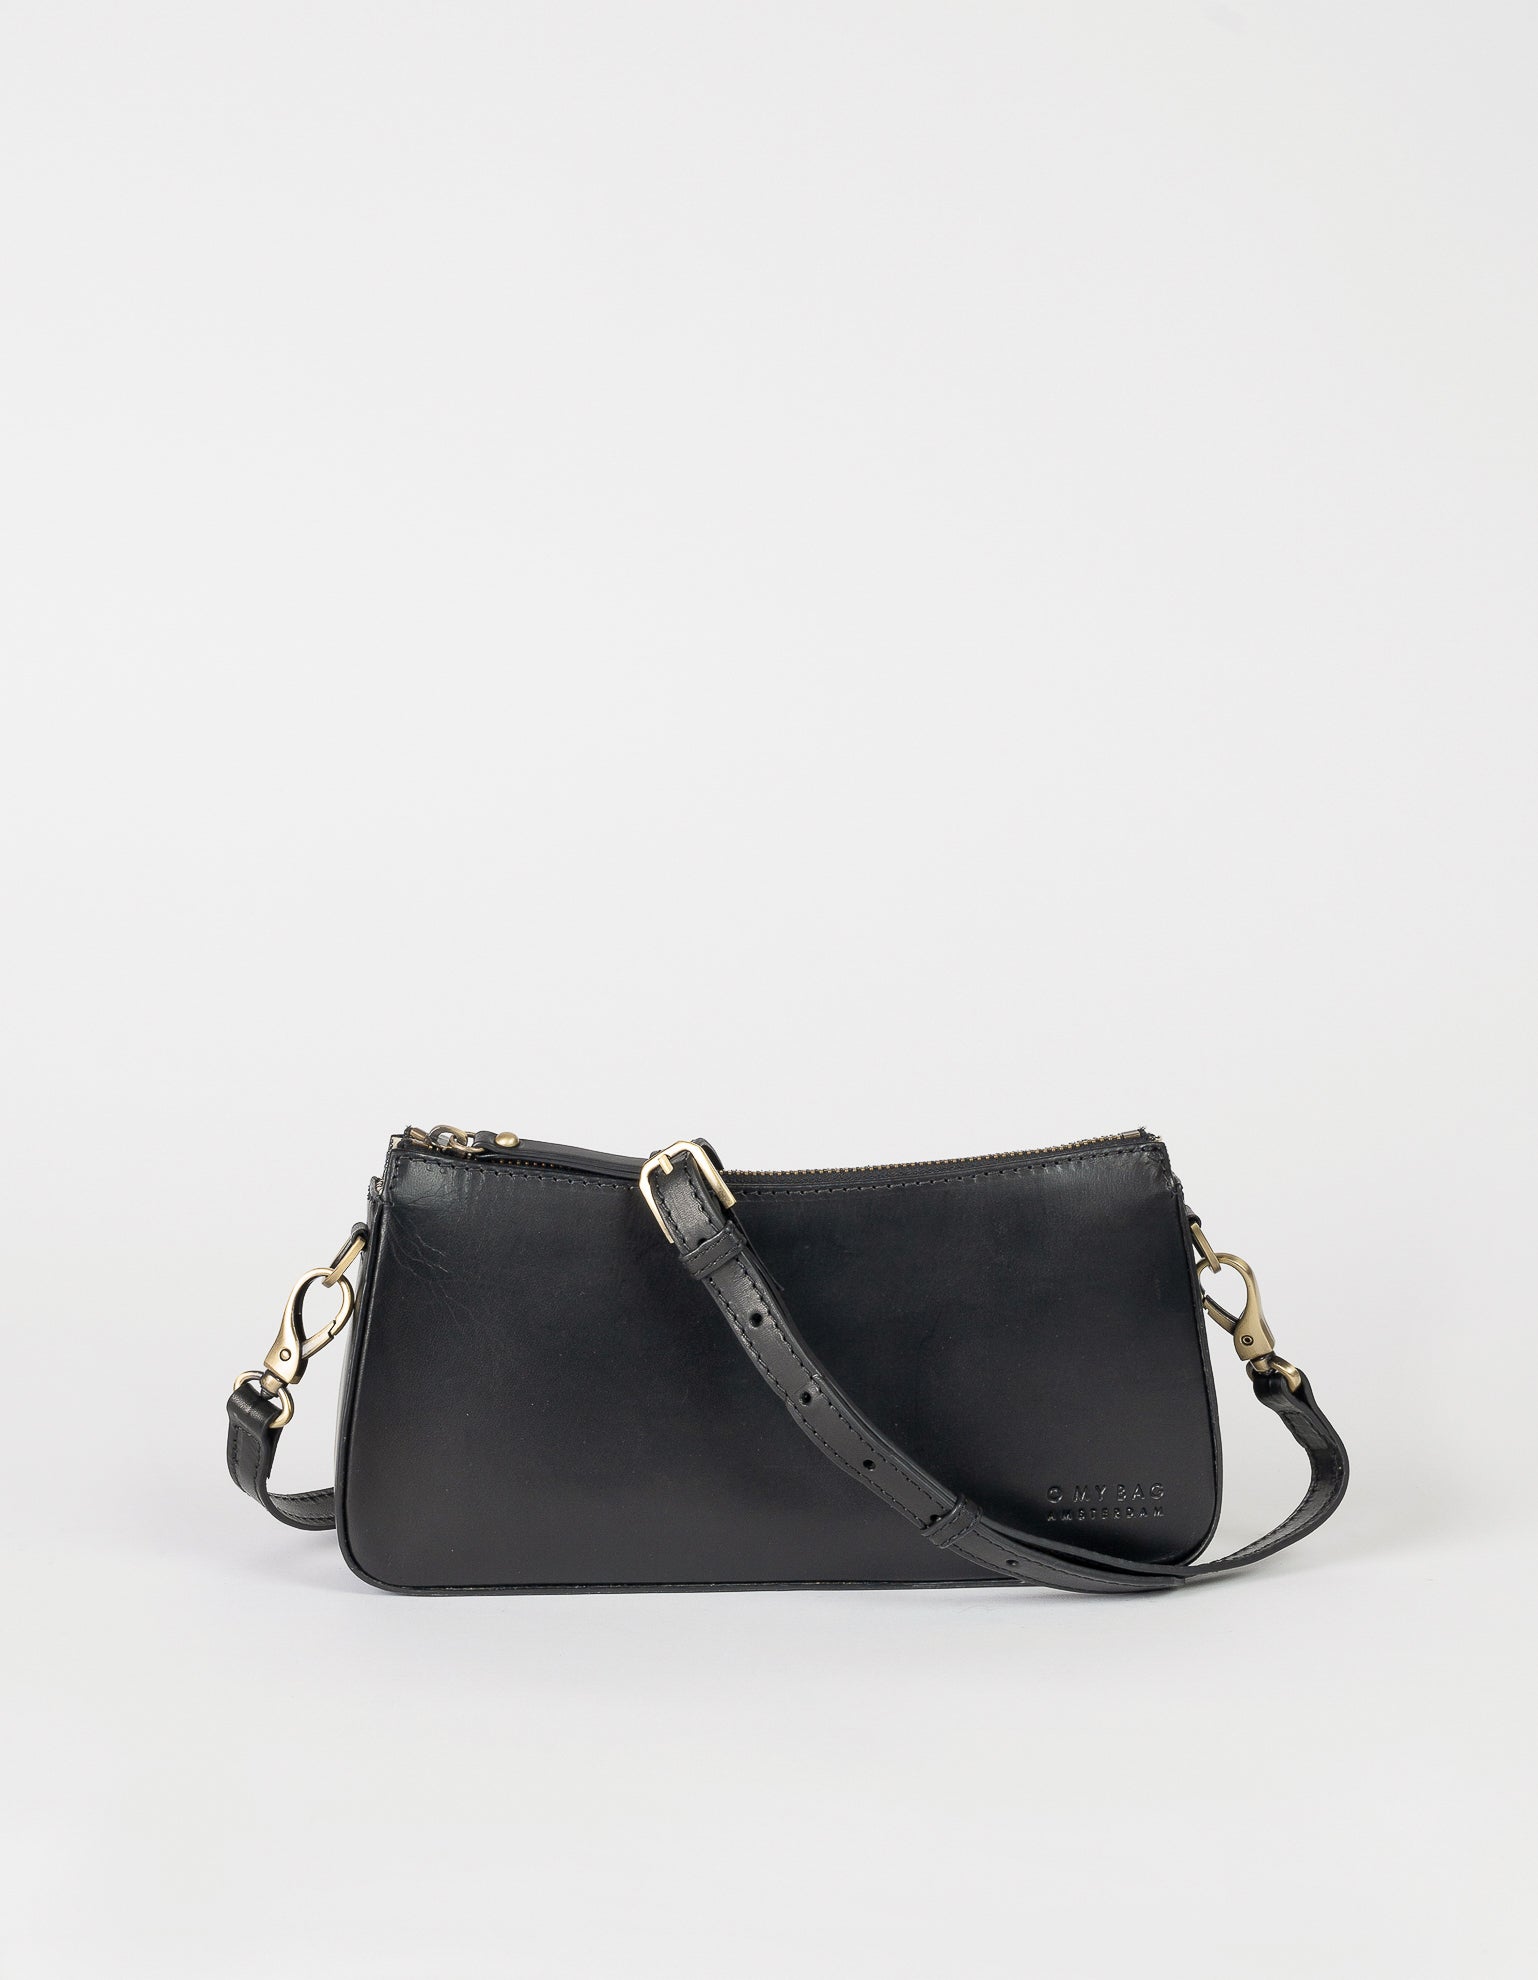 Taylor baguette bag in black classic leather - with adjustable long strap product image